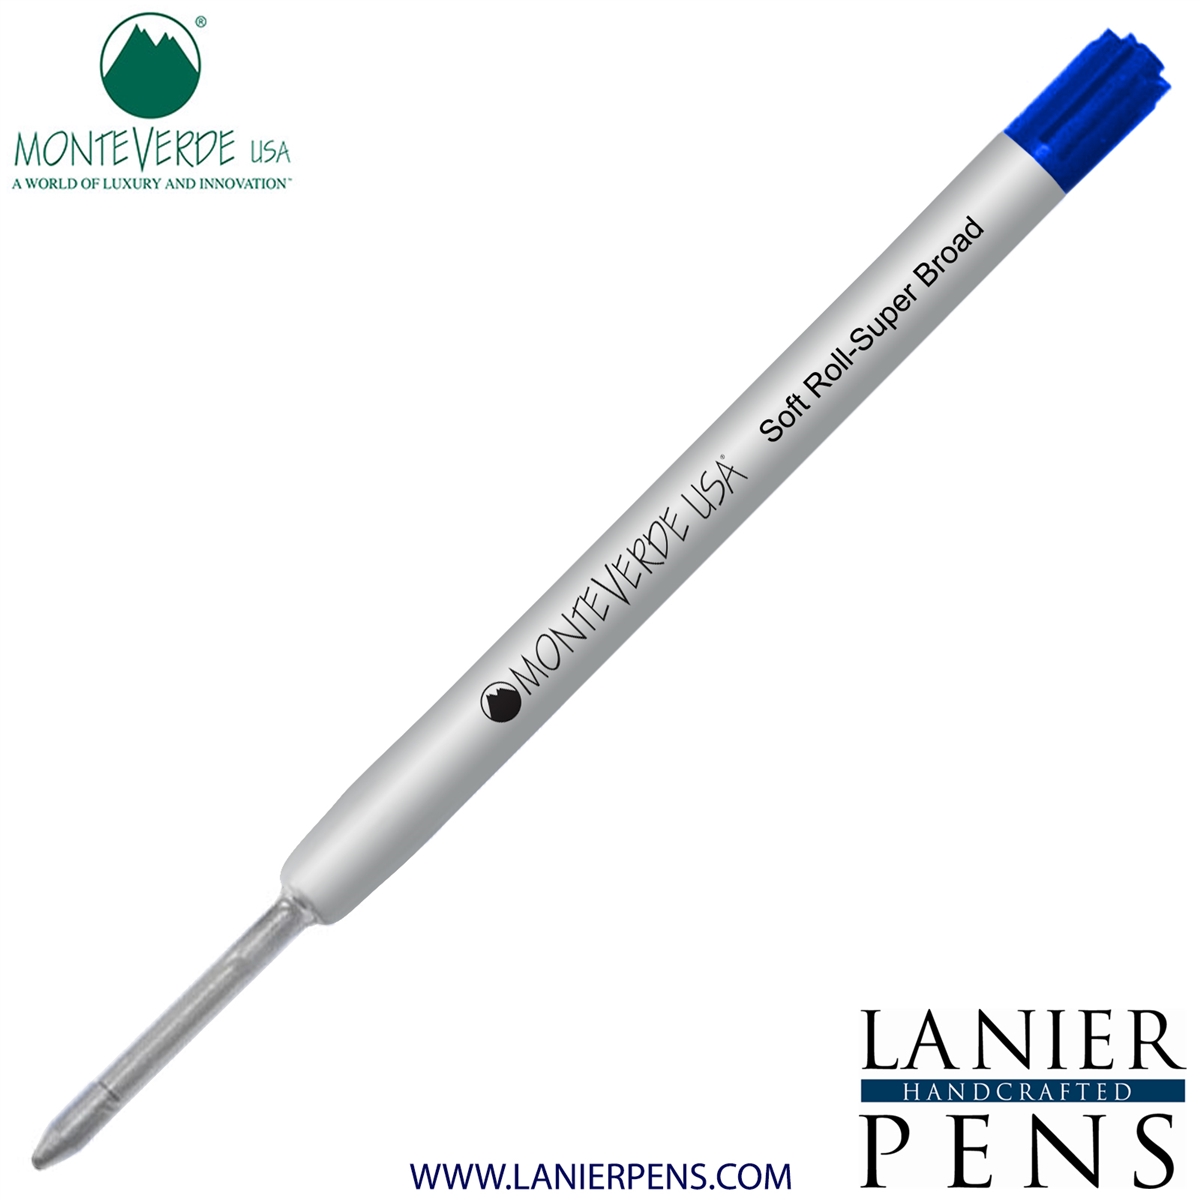 Monteverde Soft Roll Super Broad Ballpoint P15 Paste Ink Refill Compatible with most Parker Style Ballpoint Pens - Blue (Super Broad Tip 1.4mm) - Lanier Pens